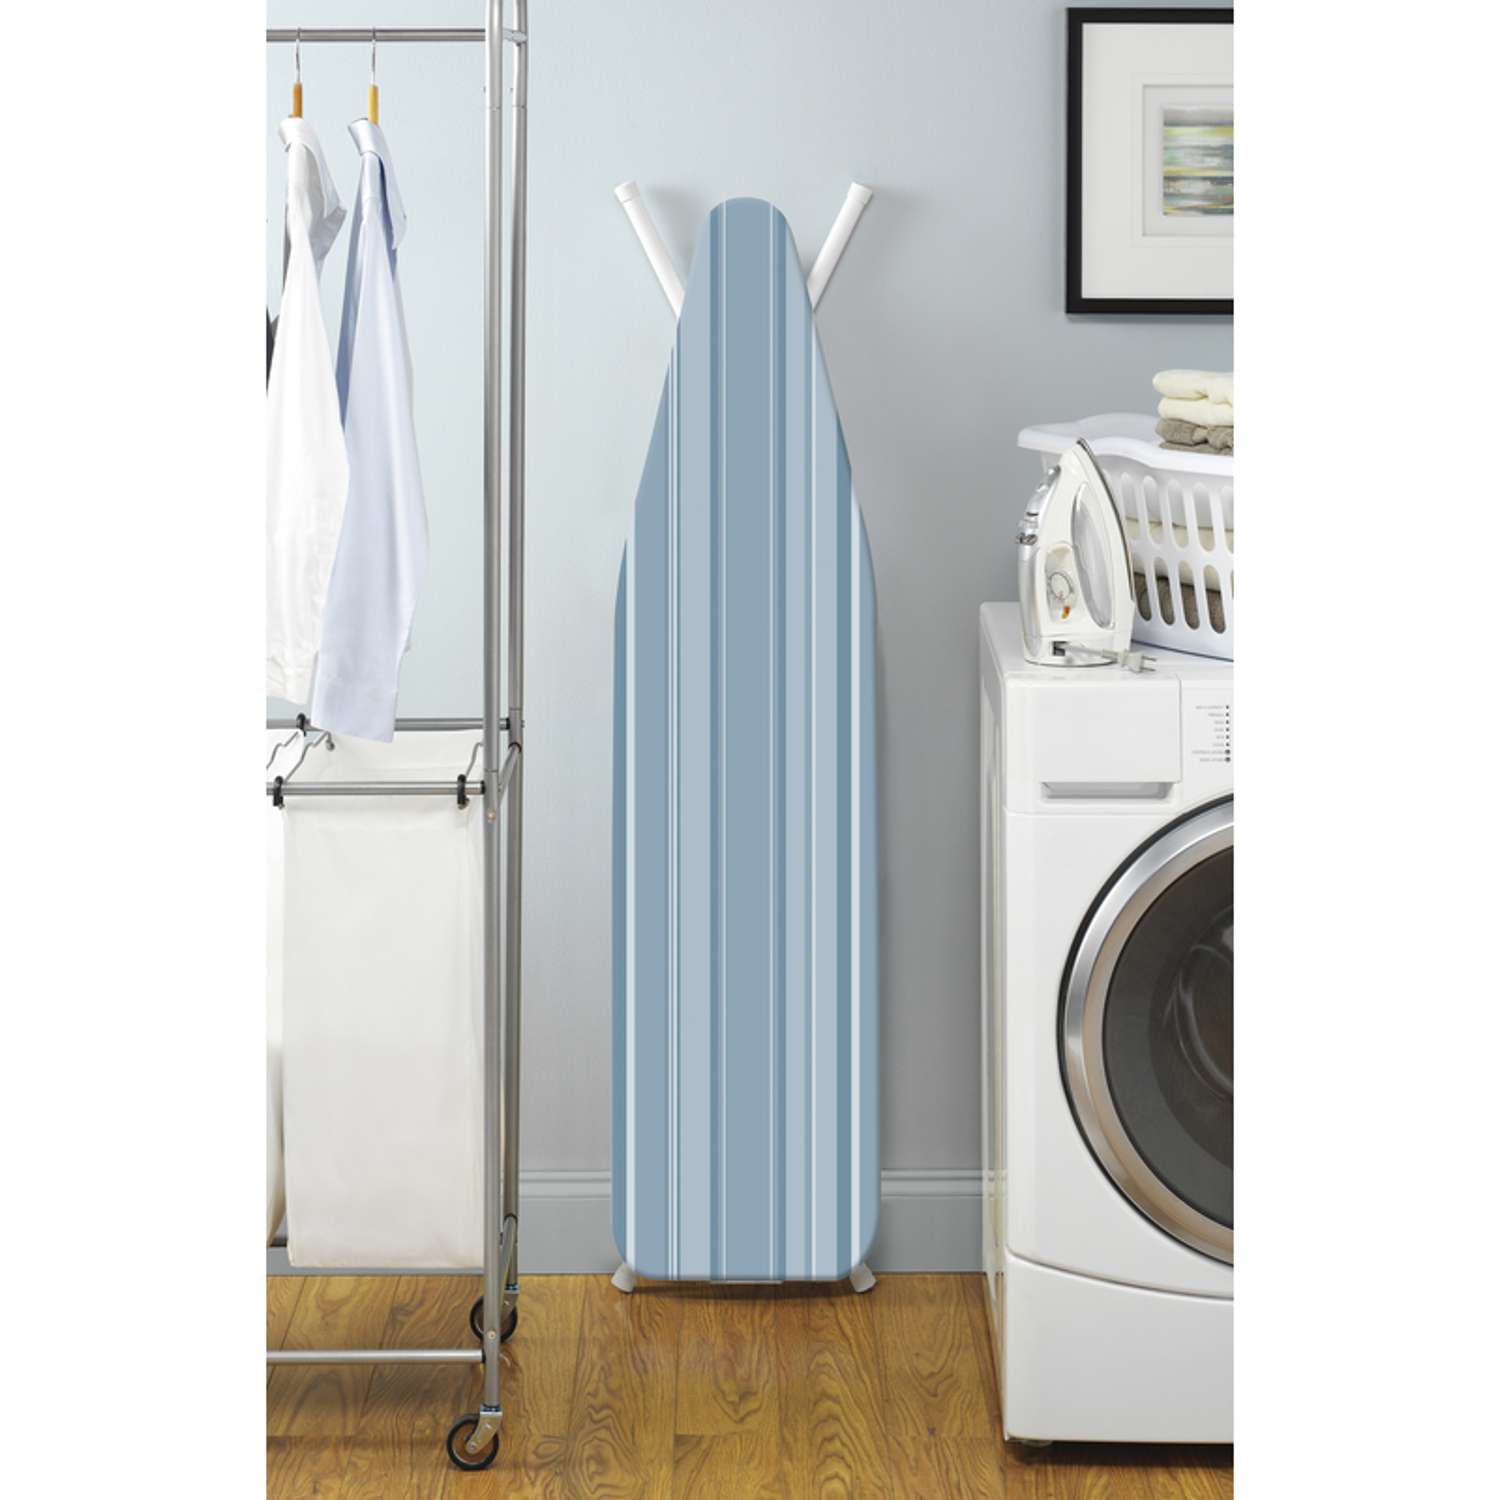 Whitmor Striped Ironing Board Cover and Pad - Navy / White, 15 x 54 in -  Pay Less Super Markets